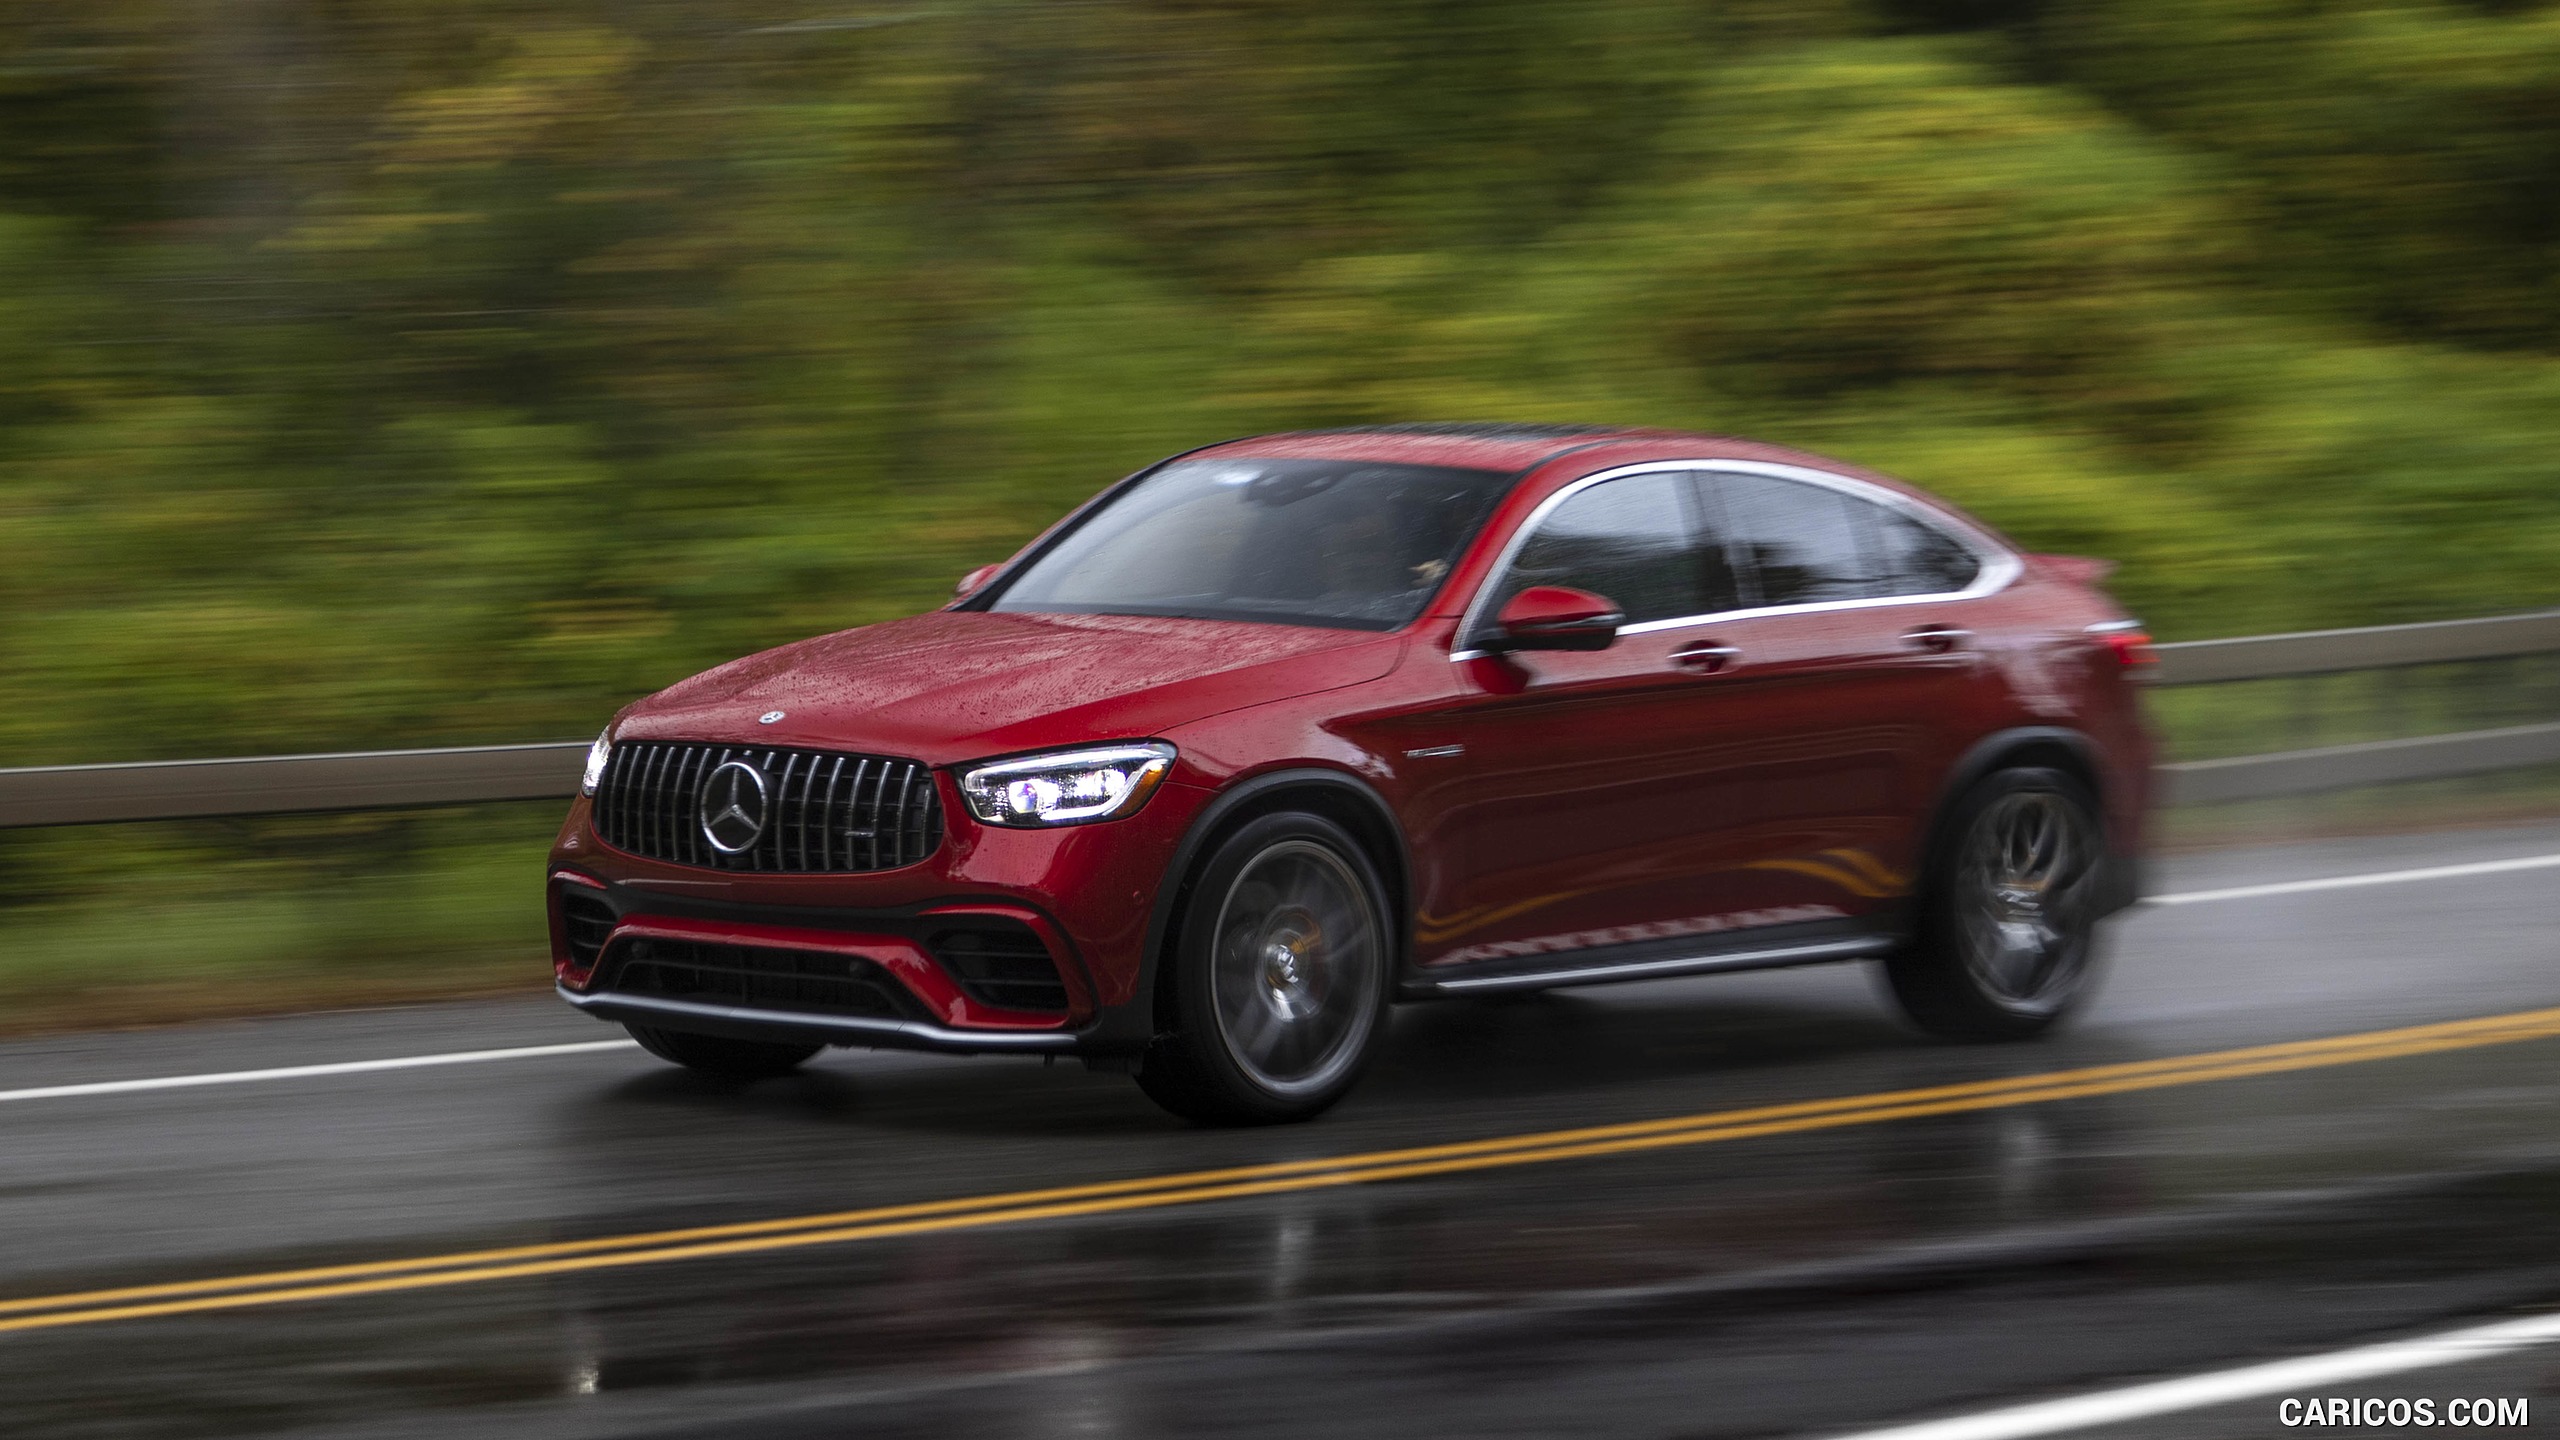 2020 Mercedes-AMG GLC 63 S Coupe (US-Spec) - Front Three-Quarter, #29 of 102